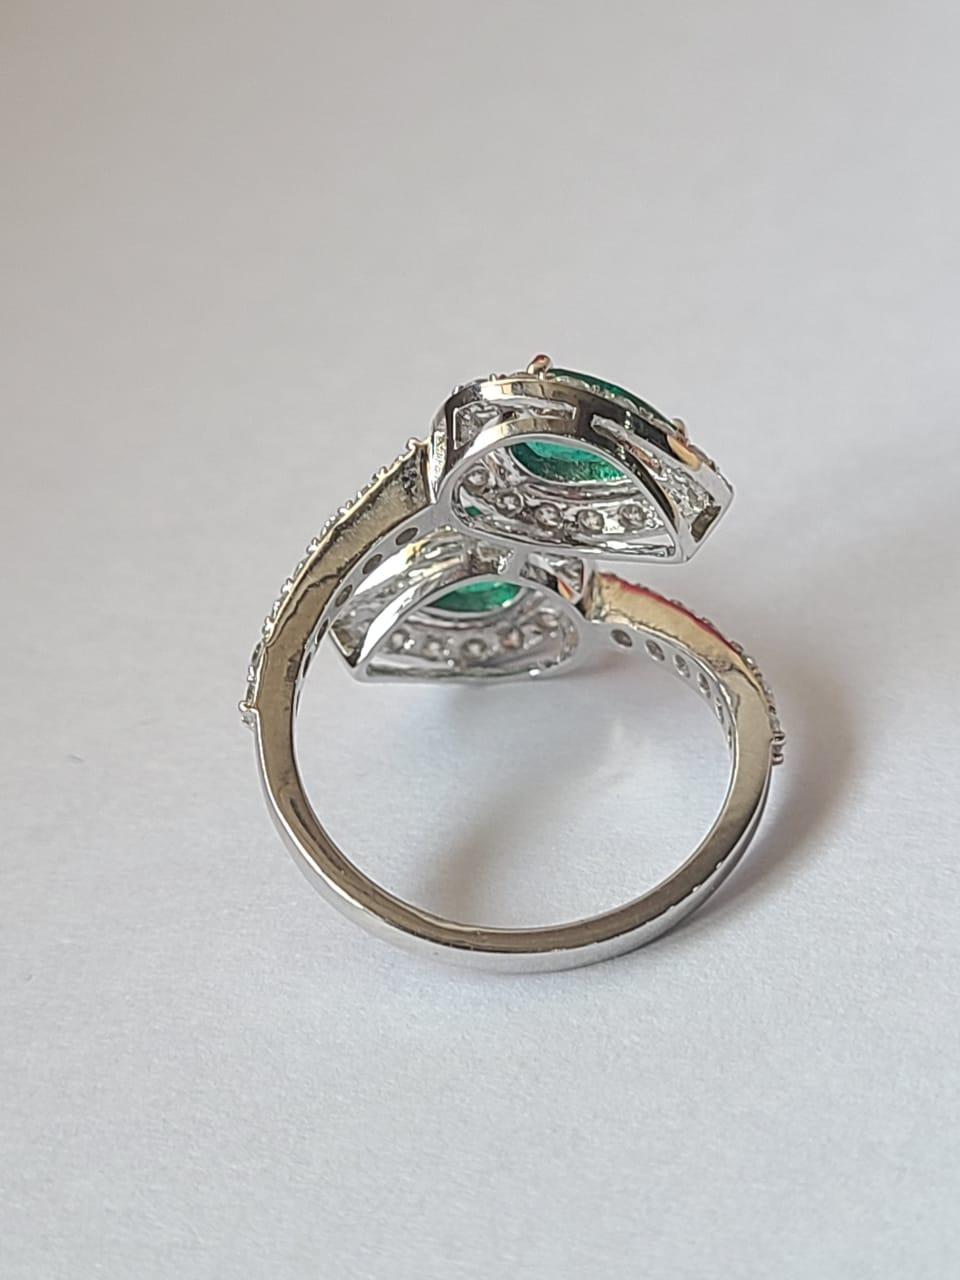 Women's or Men's Natural Zambian Emerald & Diamonds Cocktail / Engagement Ring Set in 18K Gold